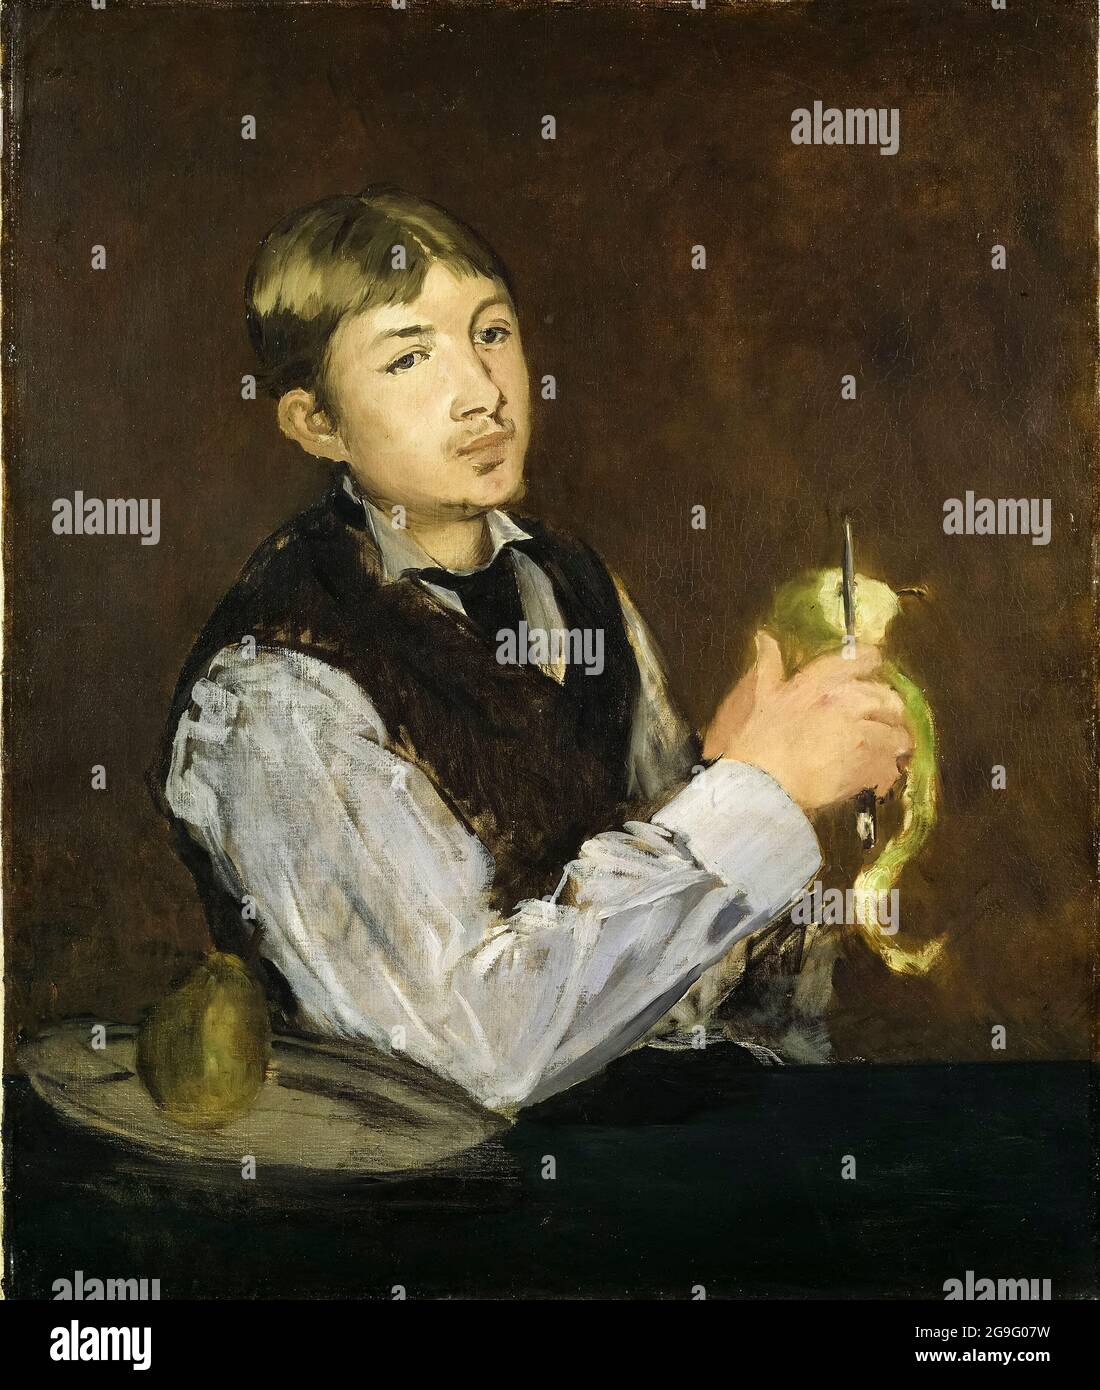 Edouard Manet, Young Boy Peeling a Pear, portrait painting, before 1883 Stock Photo